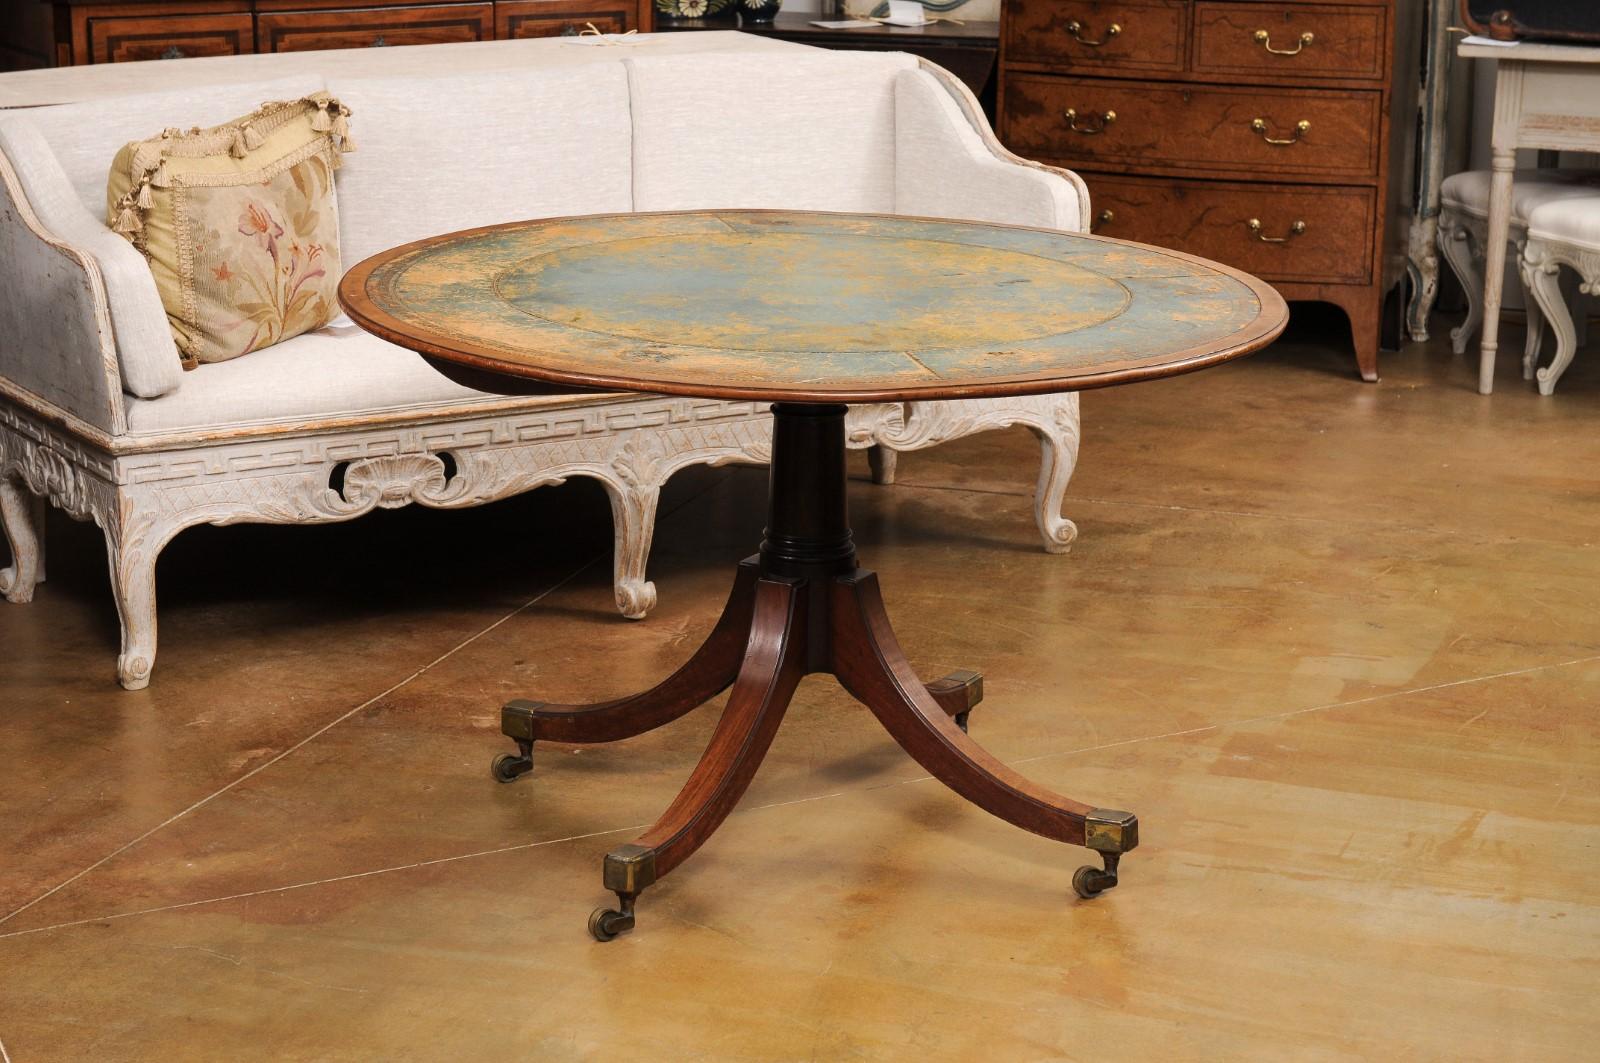 Carved English Turn of the Century Mahogany Tilt Top Center Table with Leather Top For Sale